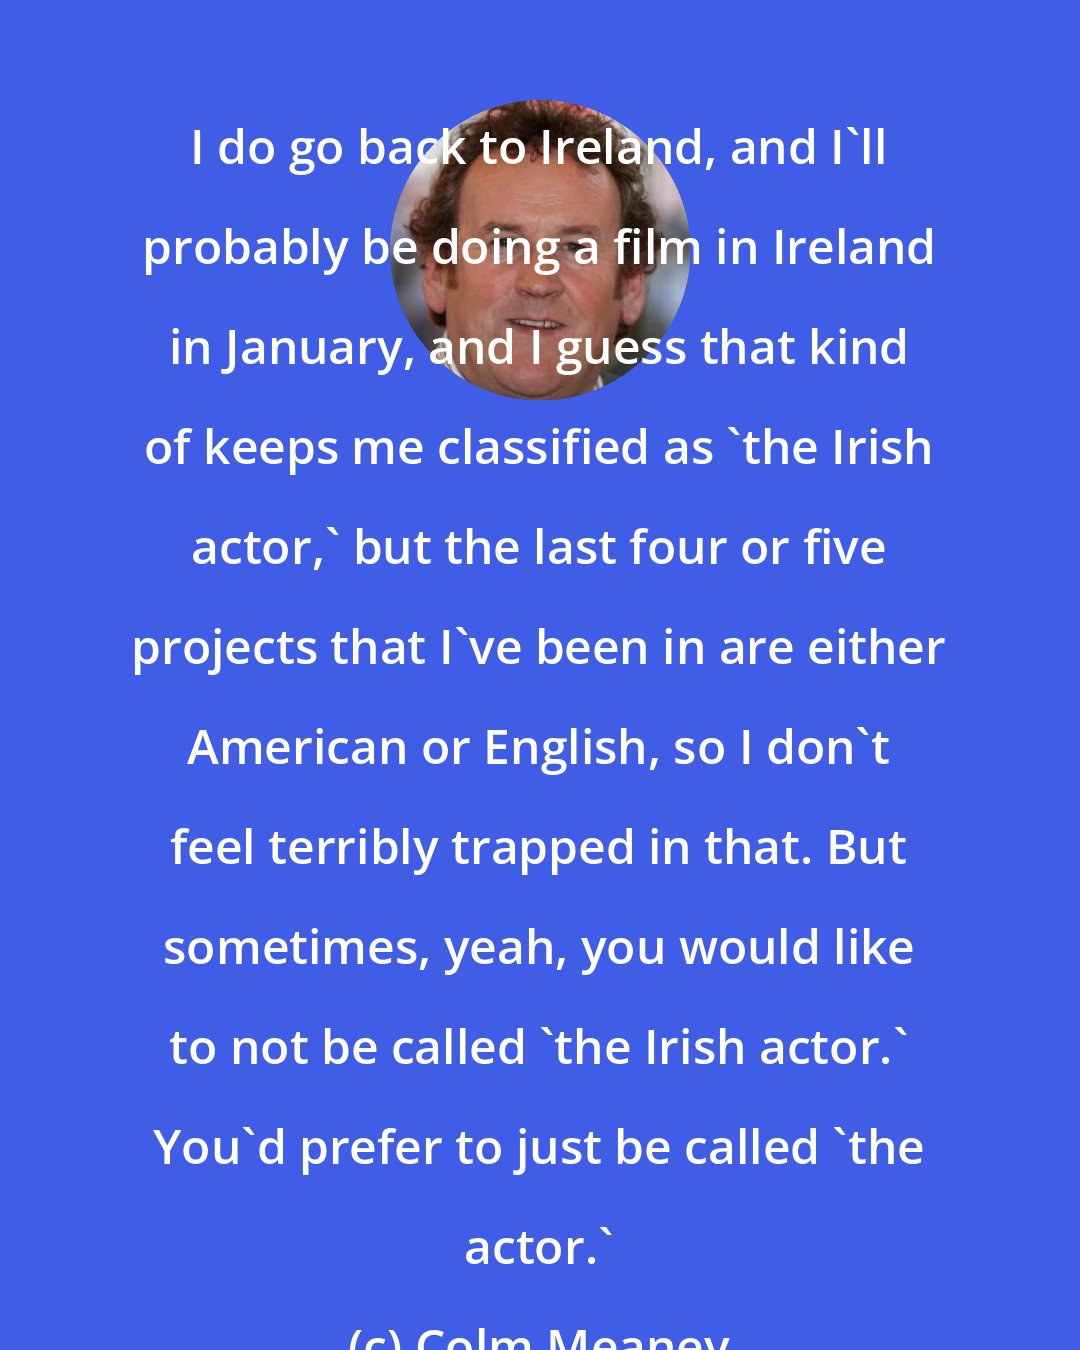 Colm Meaney: I do go back to Ireland, and I'll probably be doing a film in Ireland in January, and I guess that kind of keeps me classified as 'the Irish actor,' but the last four or five projects that I've been in are either American or English, so I don't feel terribly trapped in that. But sometimes, yeah, you would like to not be called 'the Irish actor.' You'd prefer to just be called 'the actor.'